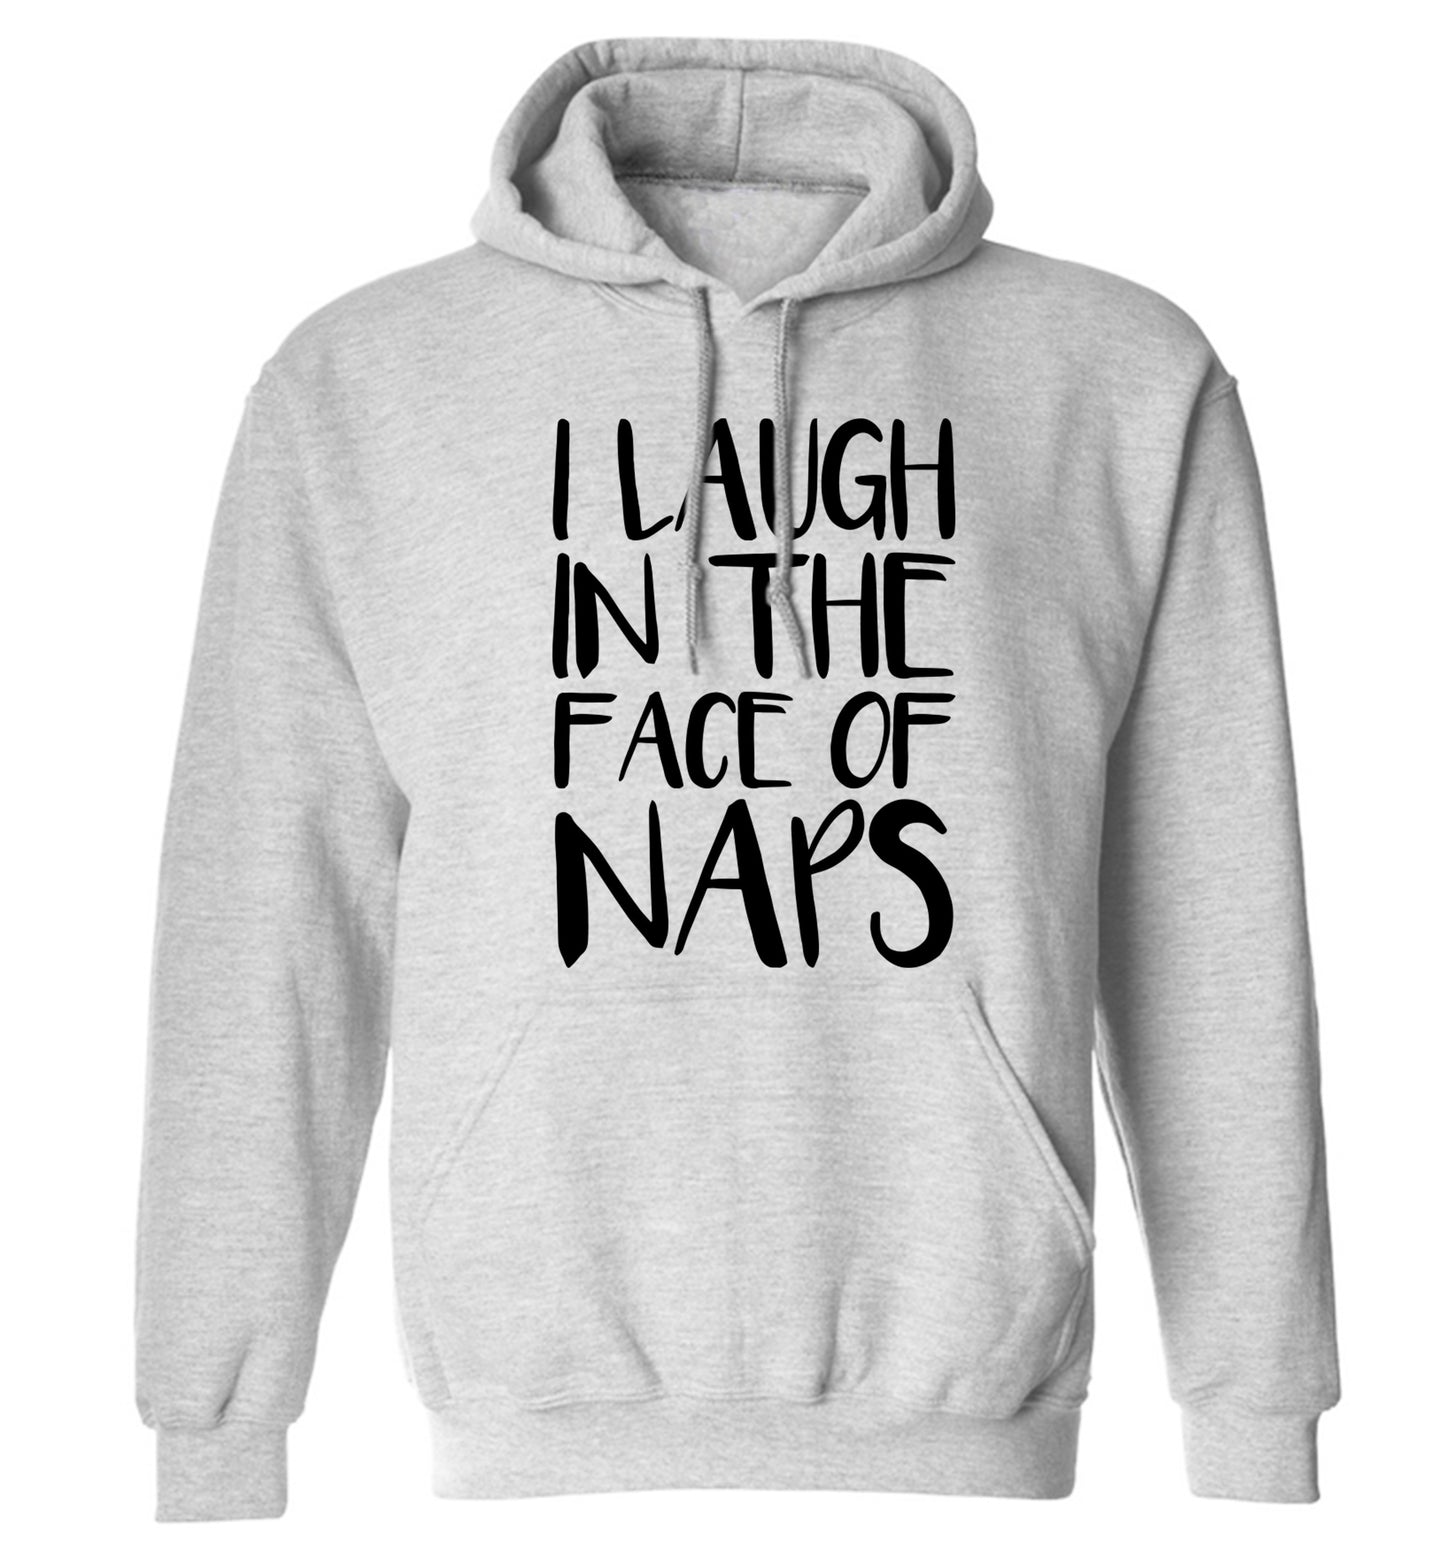 I laugh in the face of naps adults unisex grey hoodie 2XL